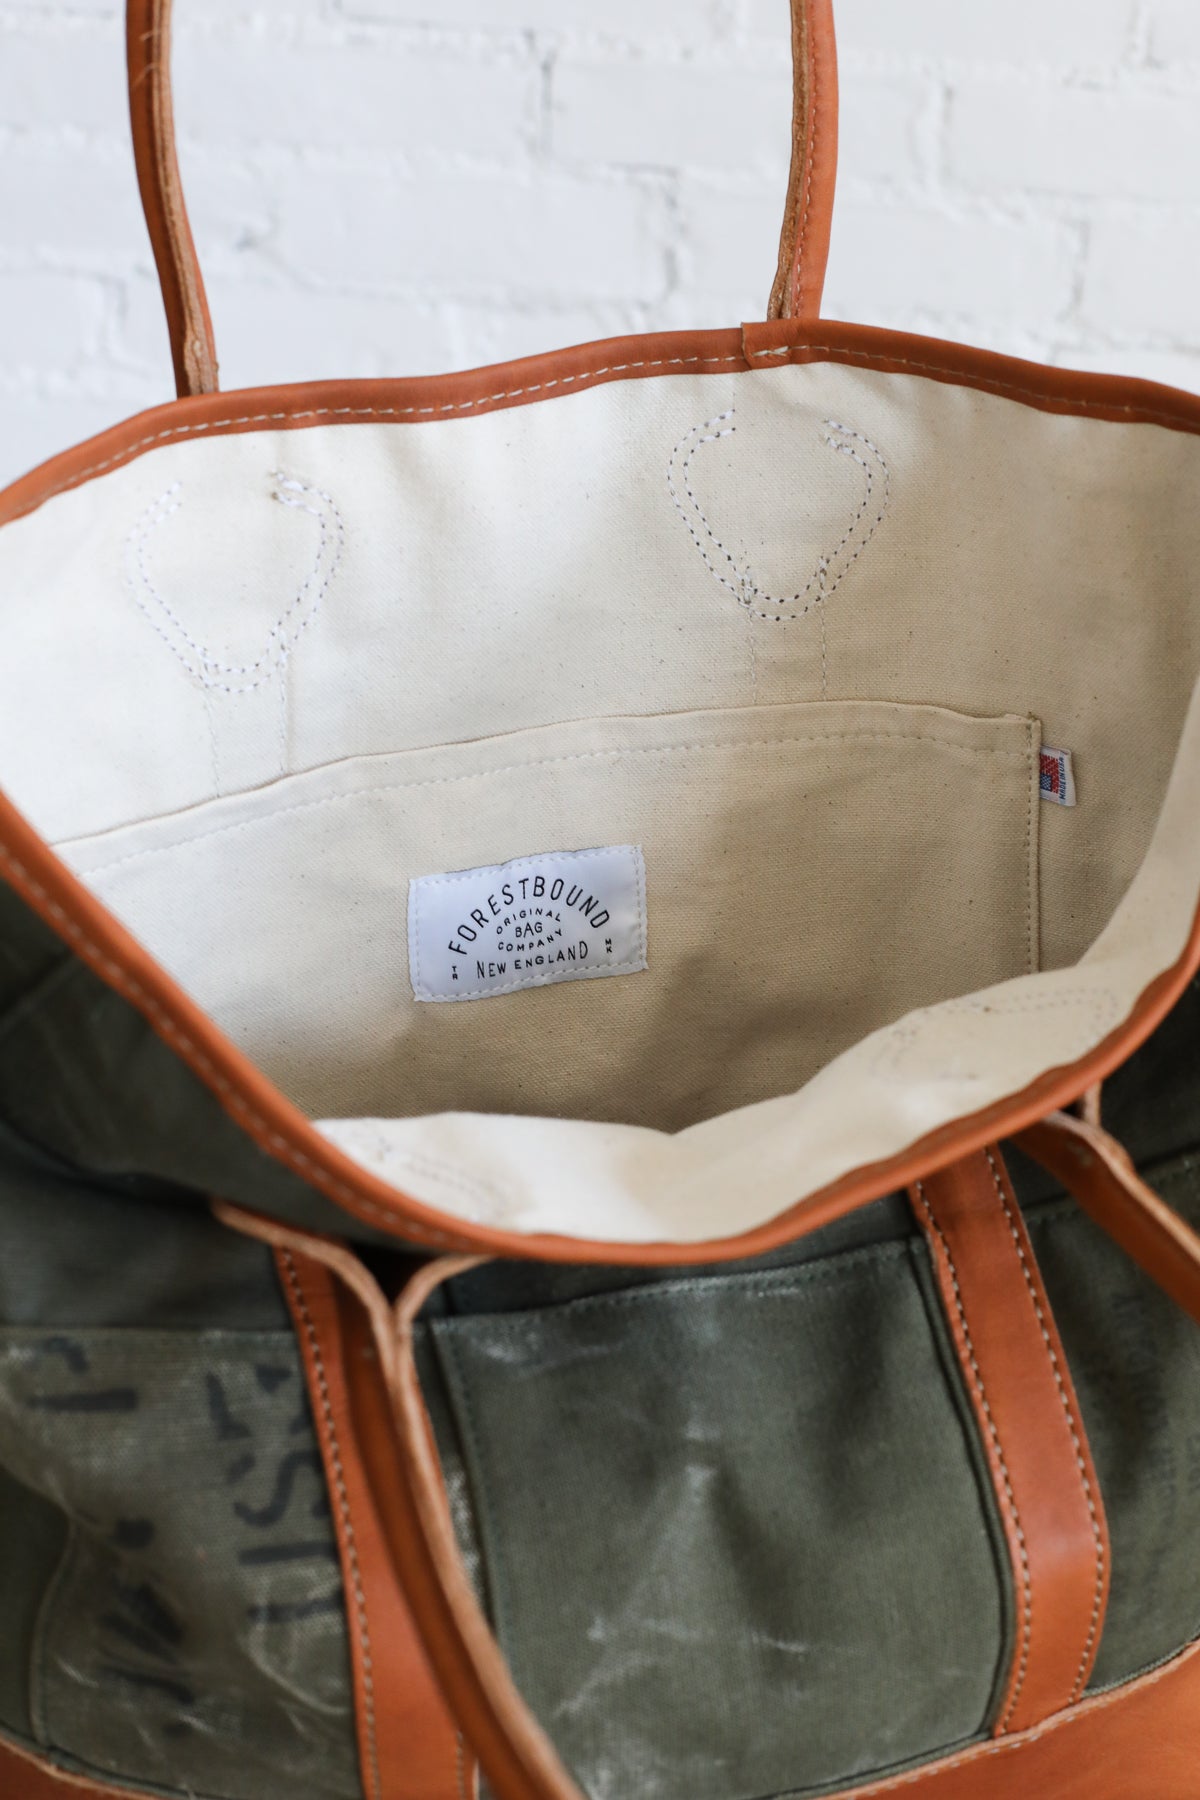 WWII era Salvaged Canvas Patchwork Carryall